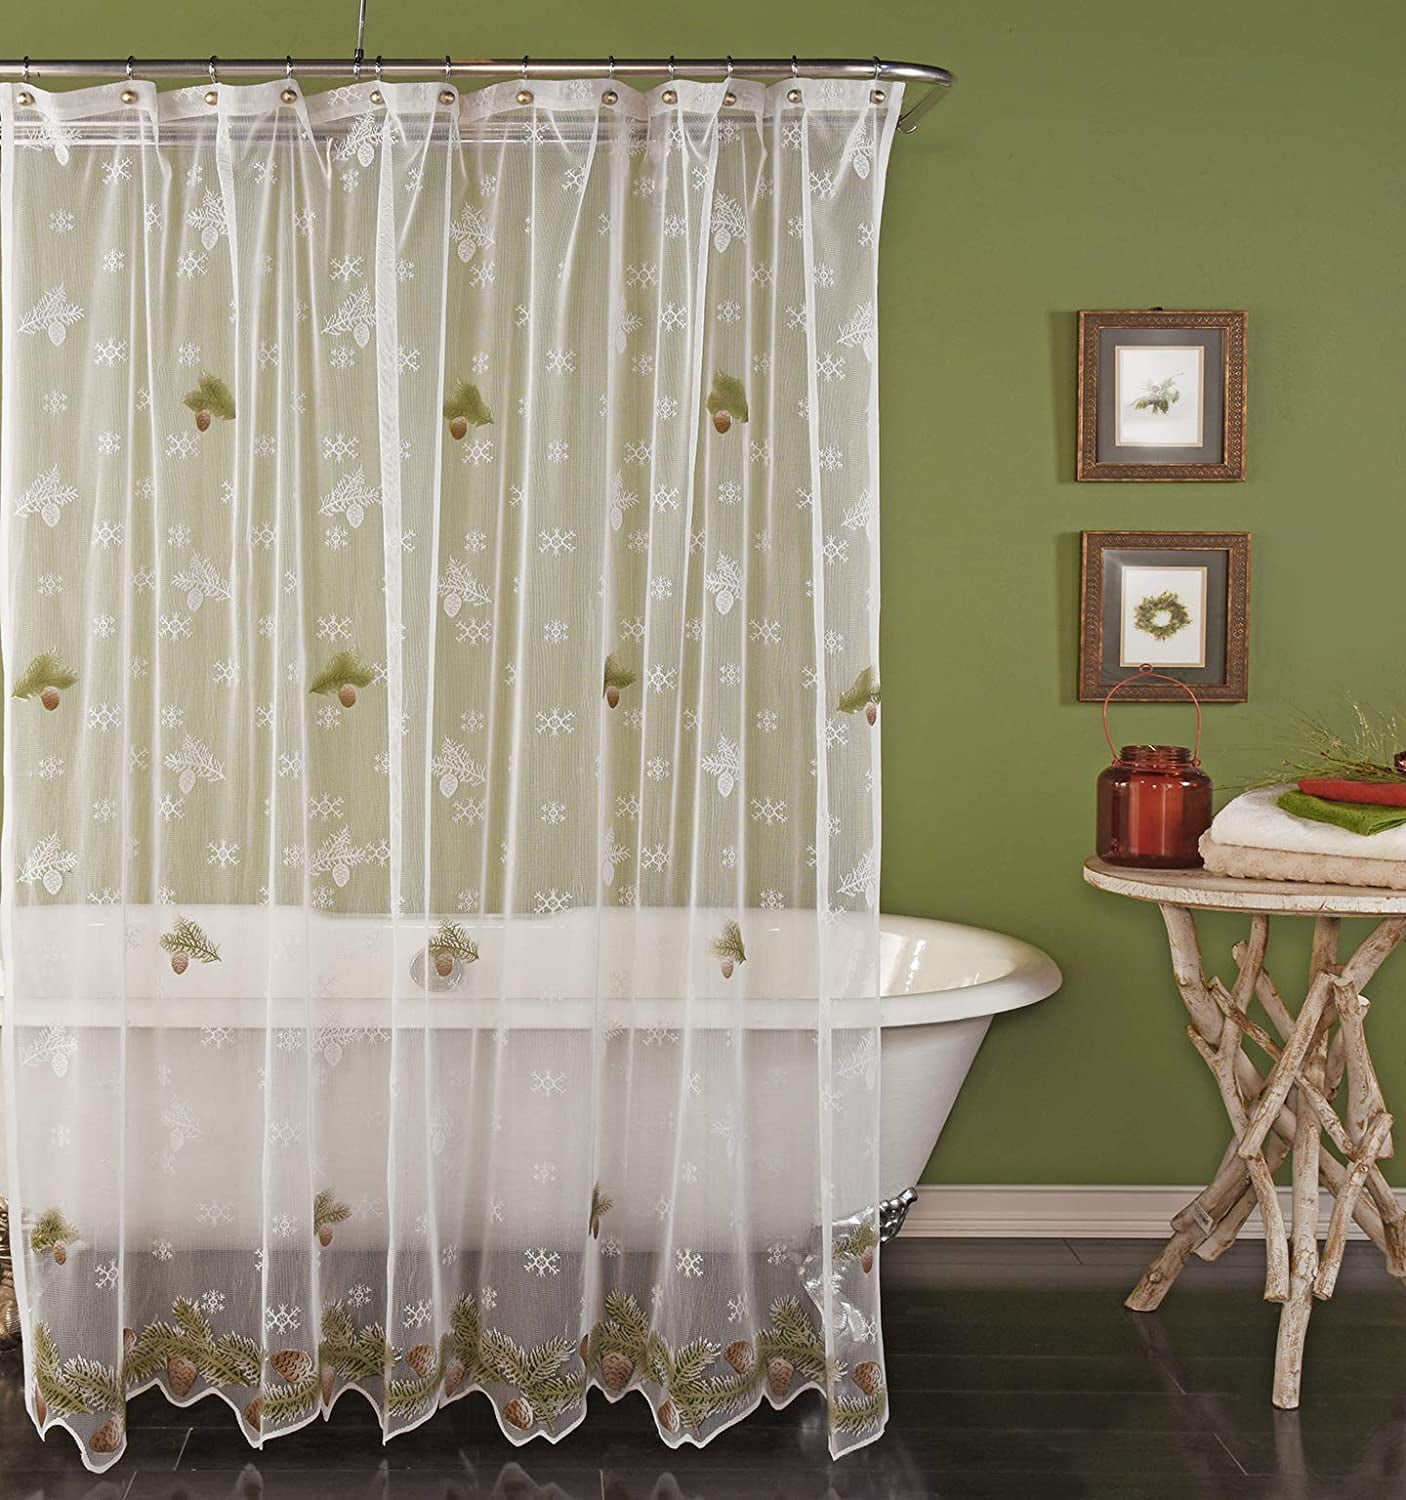 Shower Curtain Lorraine Home Fashions Milan Ivory Damask Simulated Valance New 